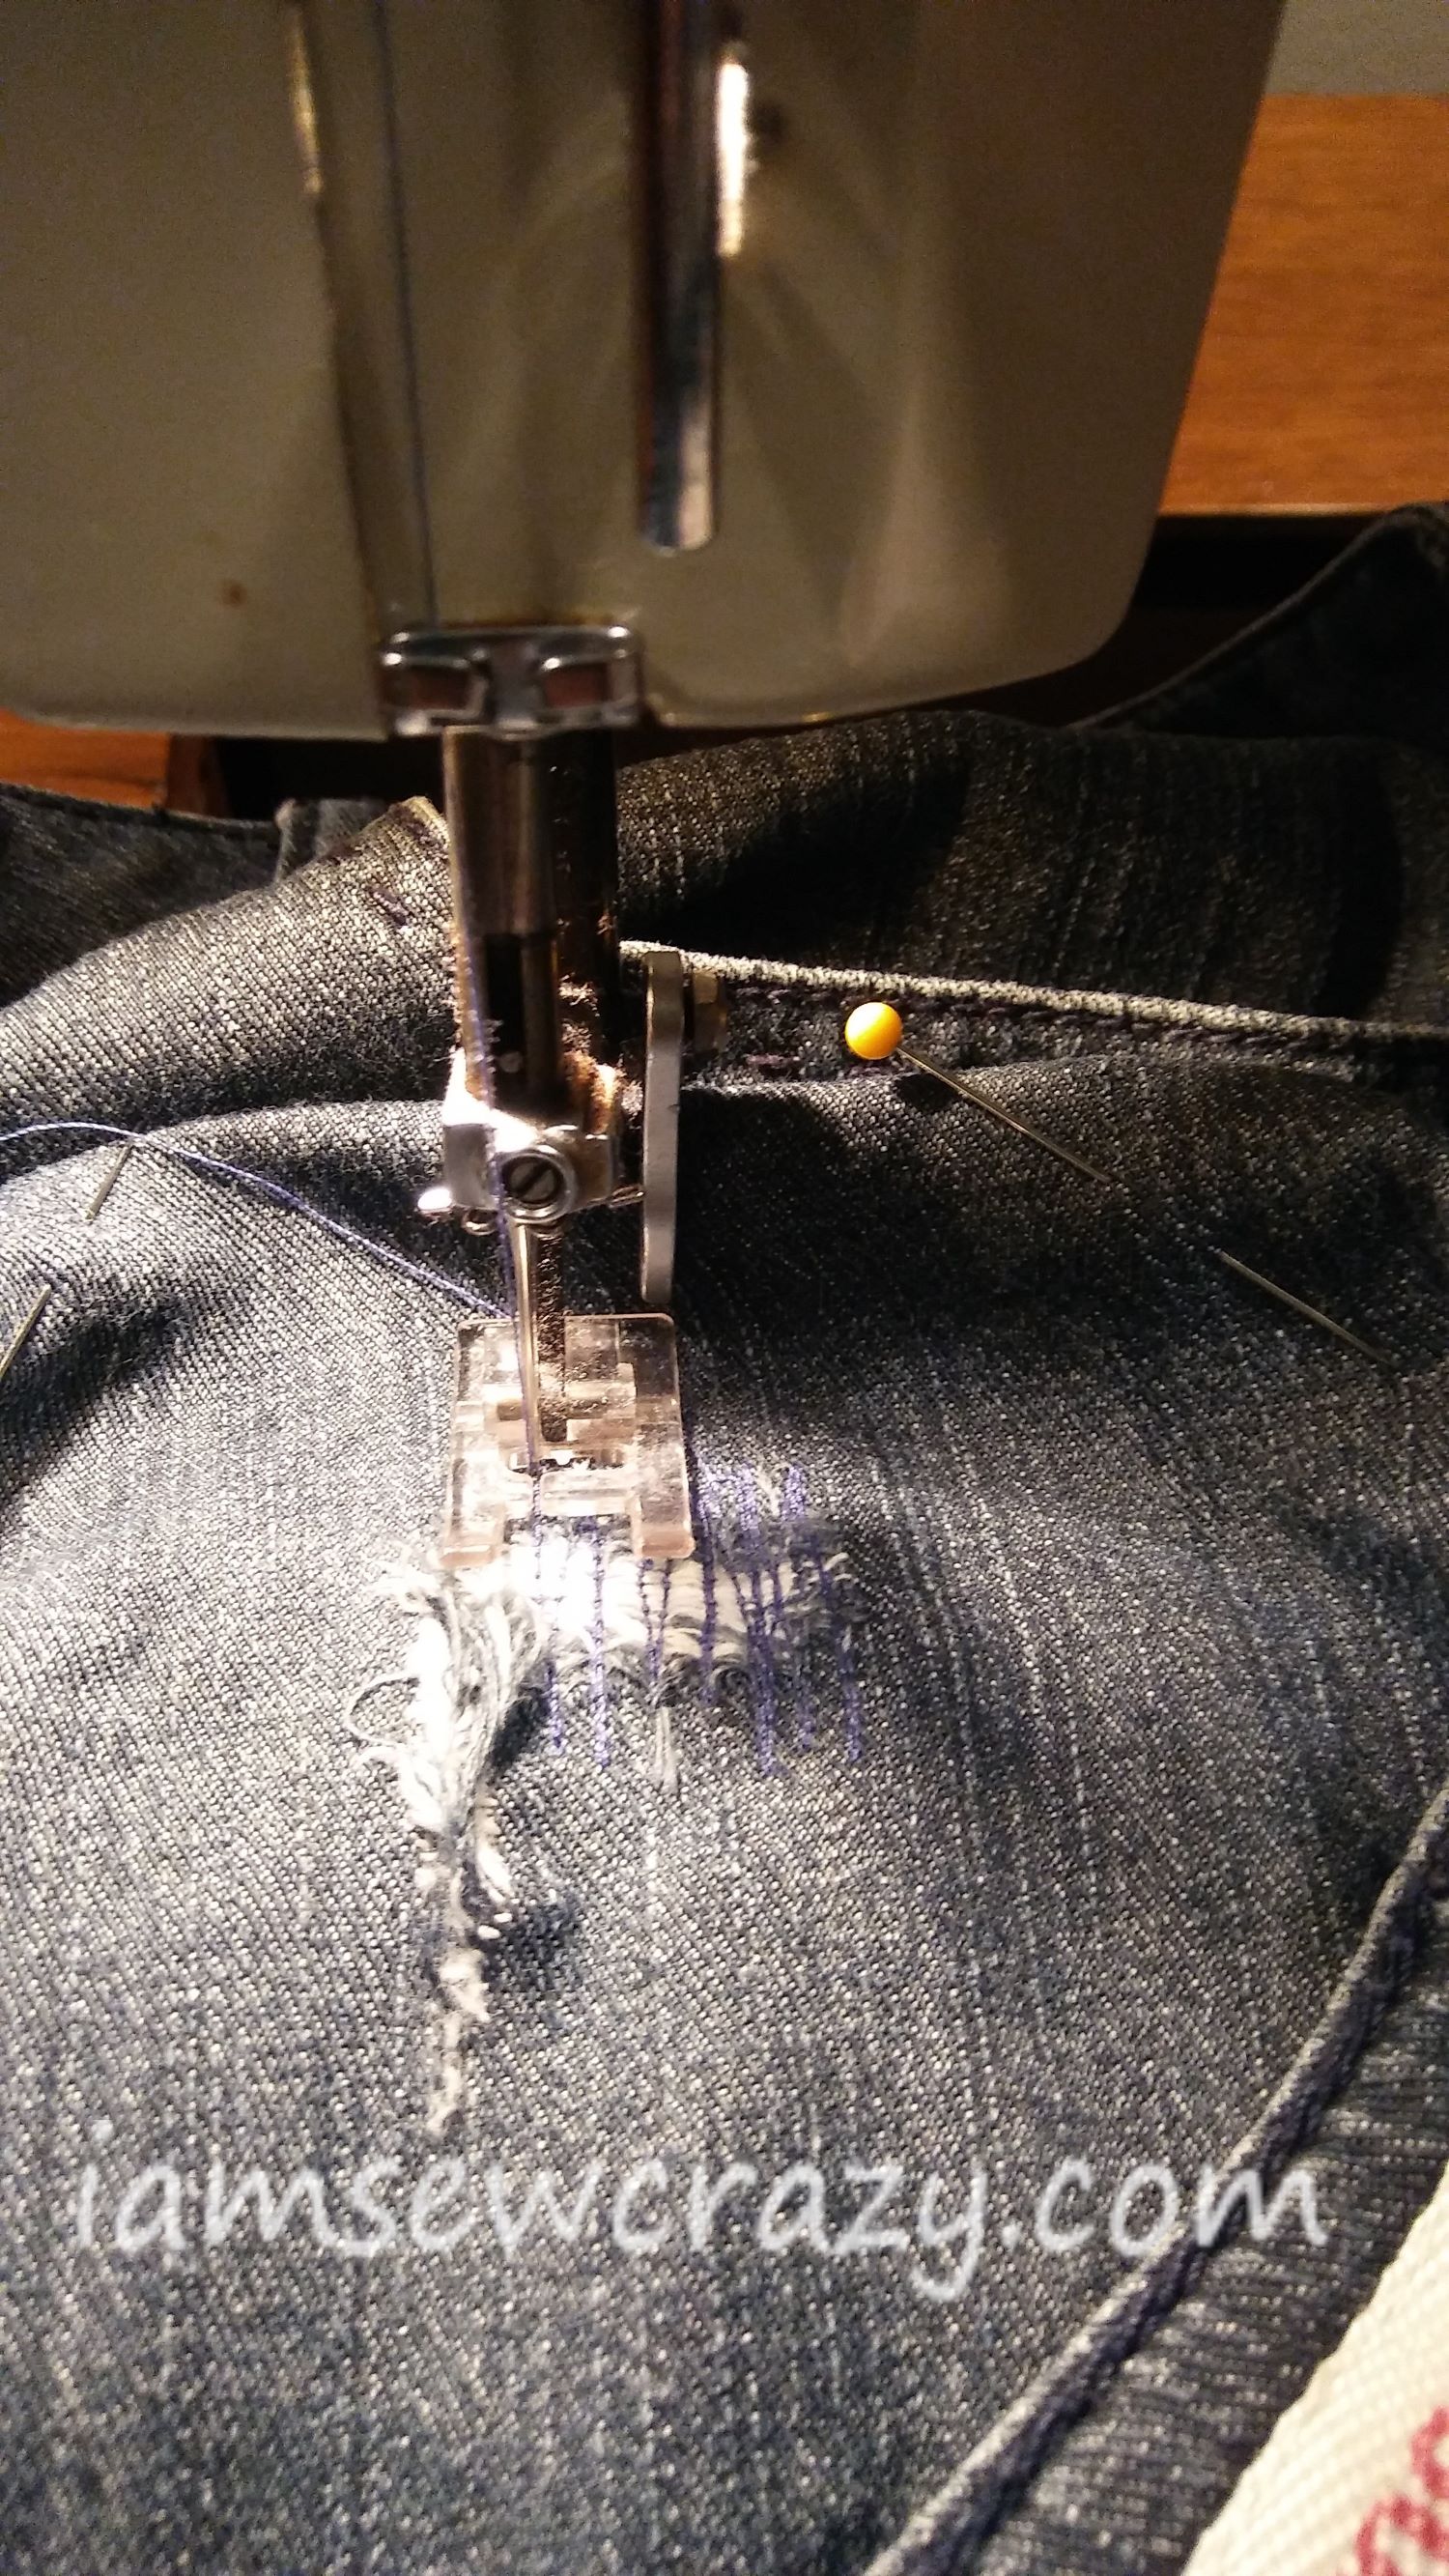 patching clothing